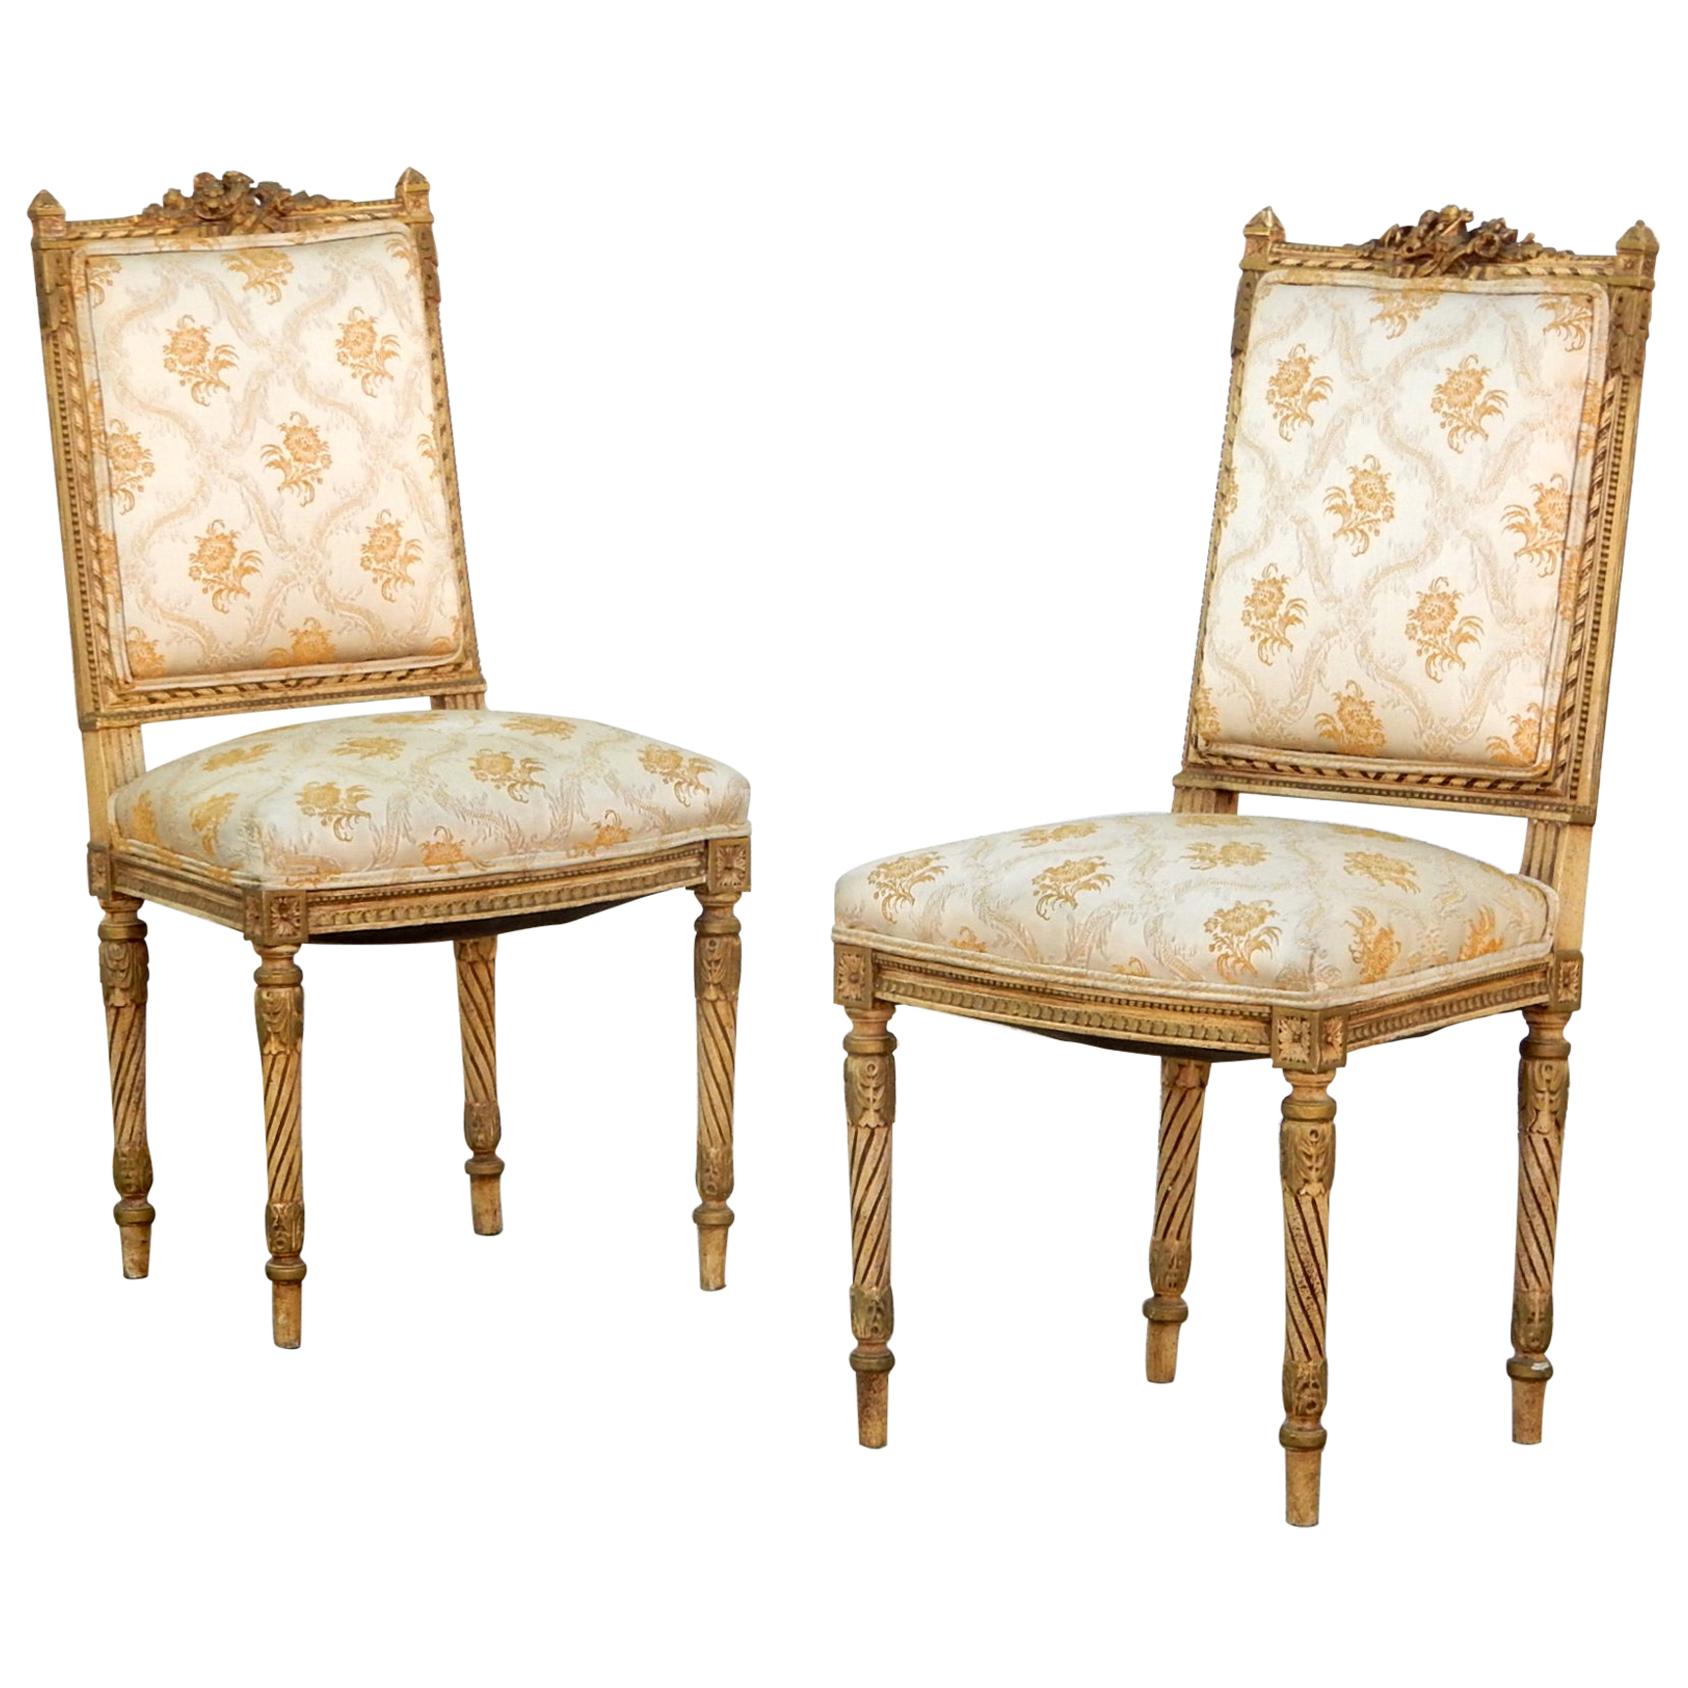 Pair of Painted Louis XVI Parlor Chairs